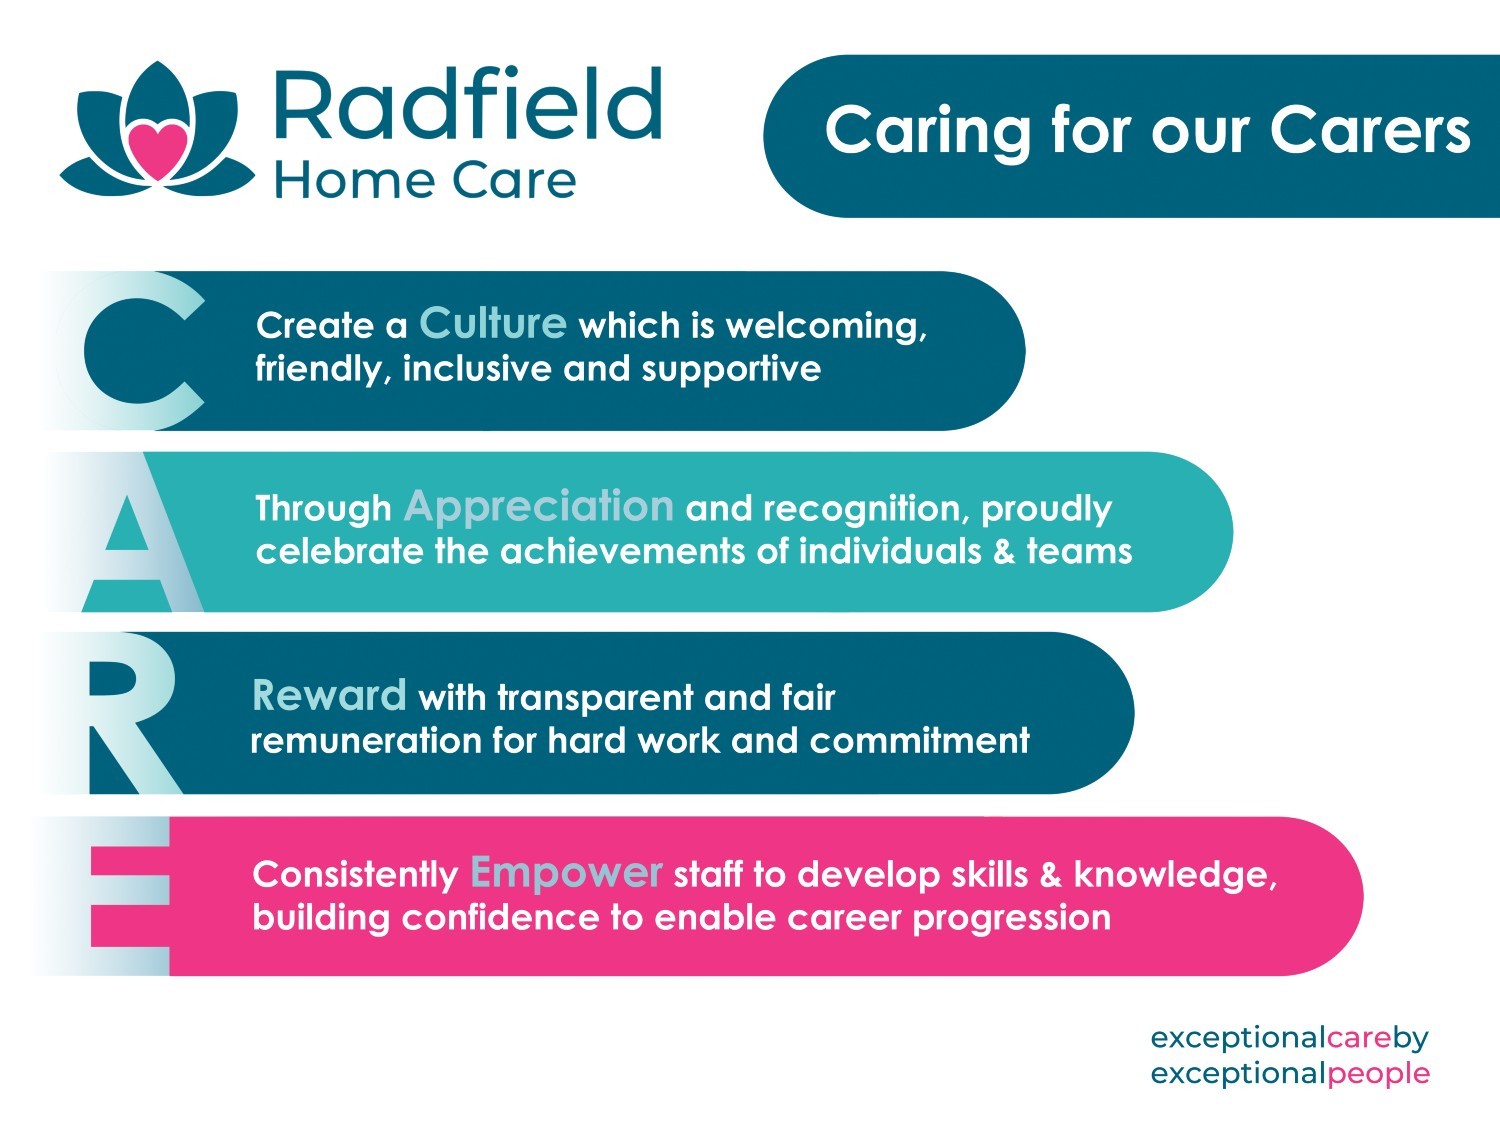 Radfield Franchise Caring for Careers